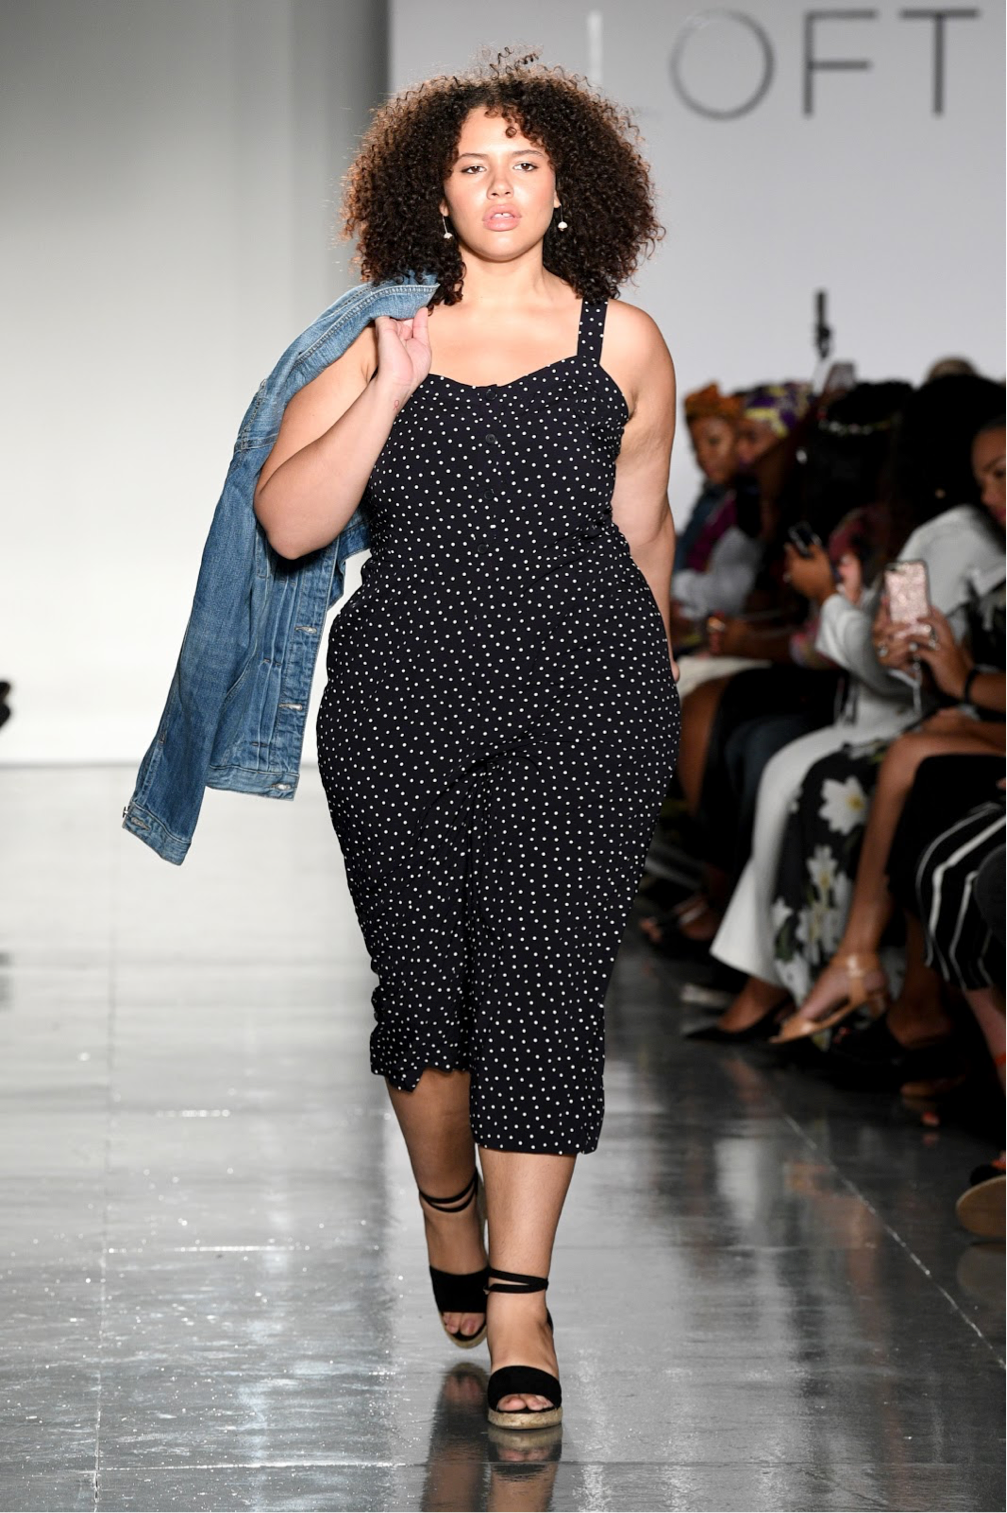 Move Over New York Fashion Week, Curvy Con Is Here